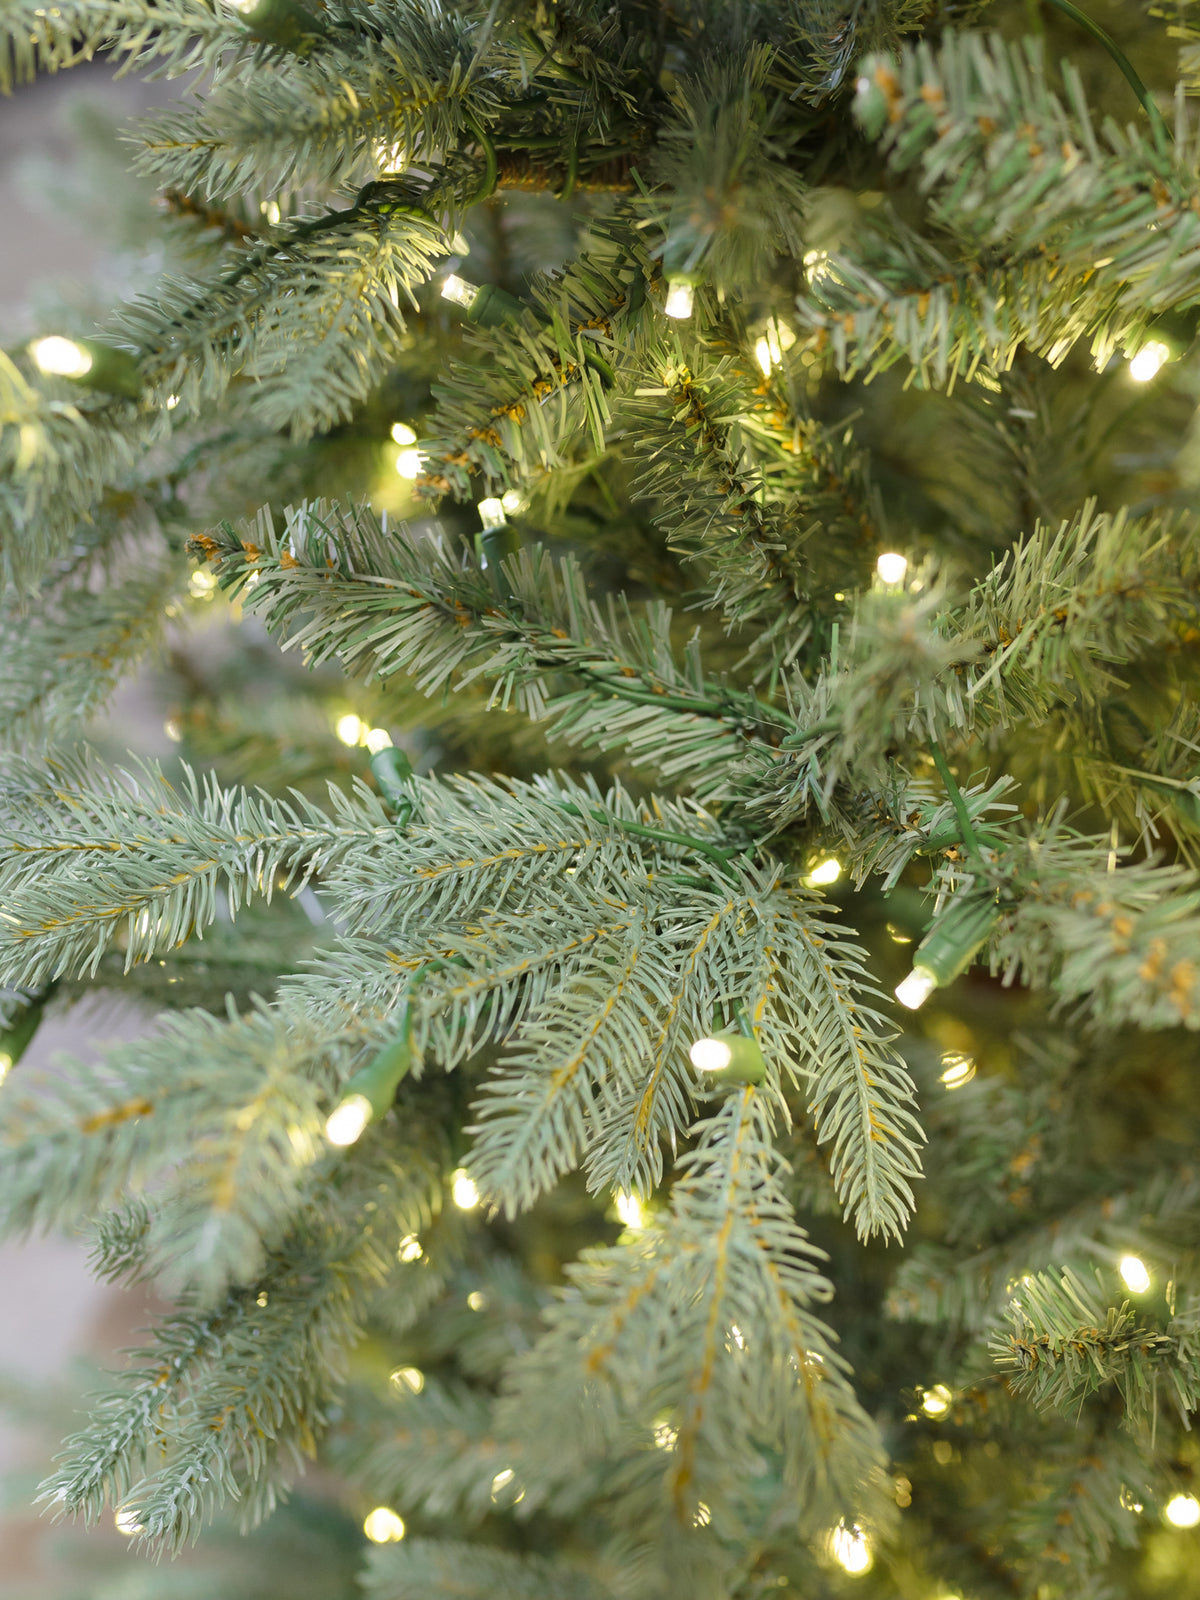 Blue Spruce Christmas Tree with 5mm LED